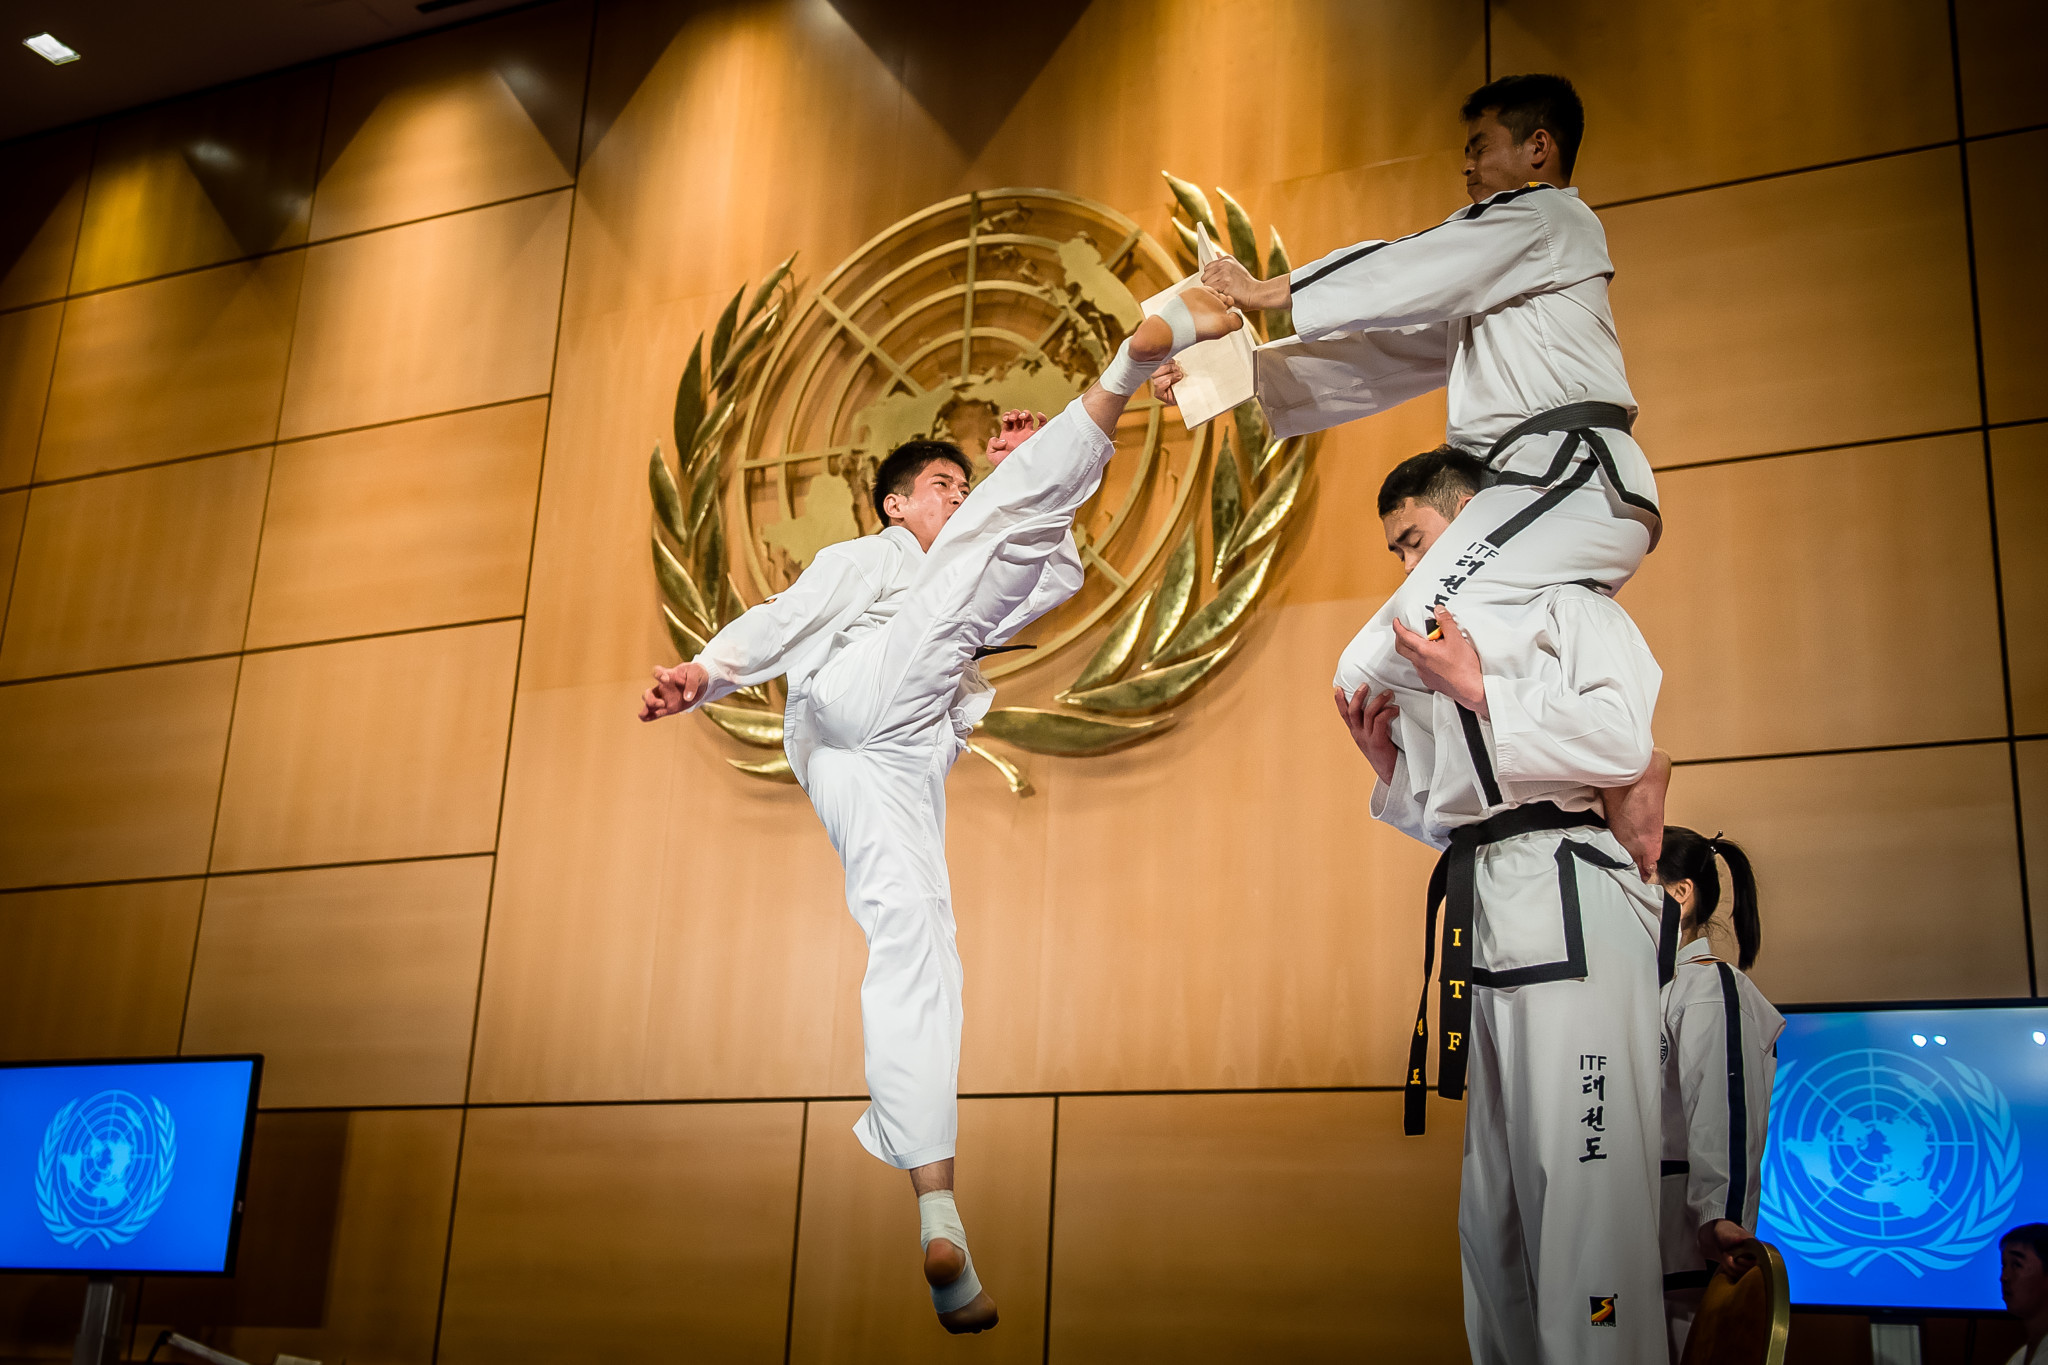 The ITF team from North Korea performed for the audience first ©World Taekwondo